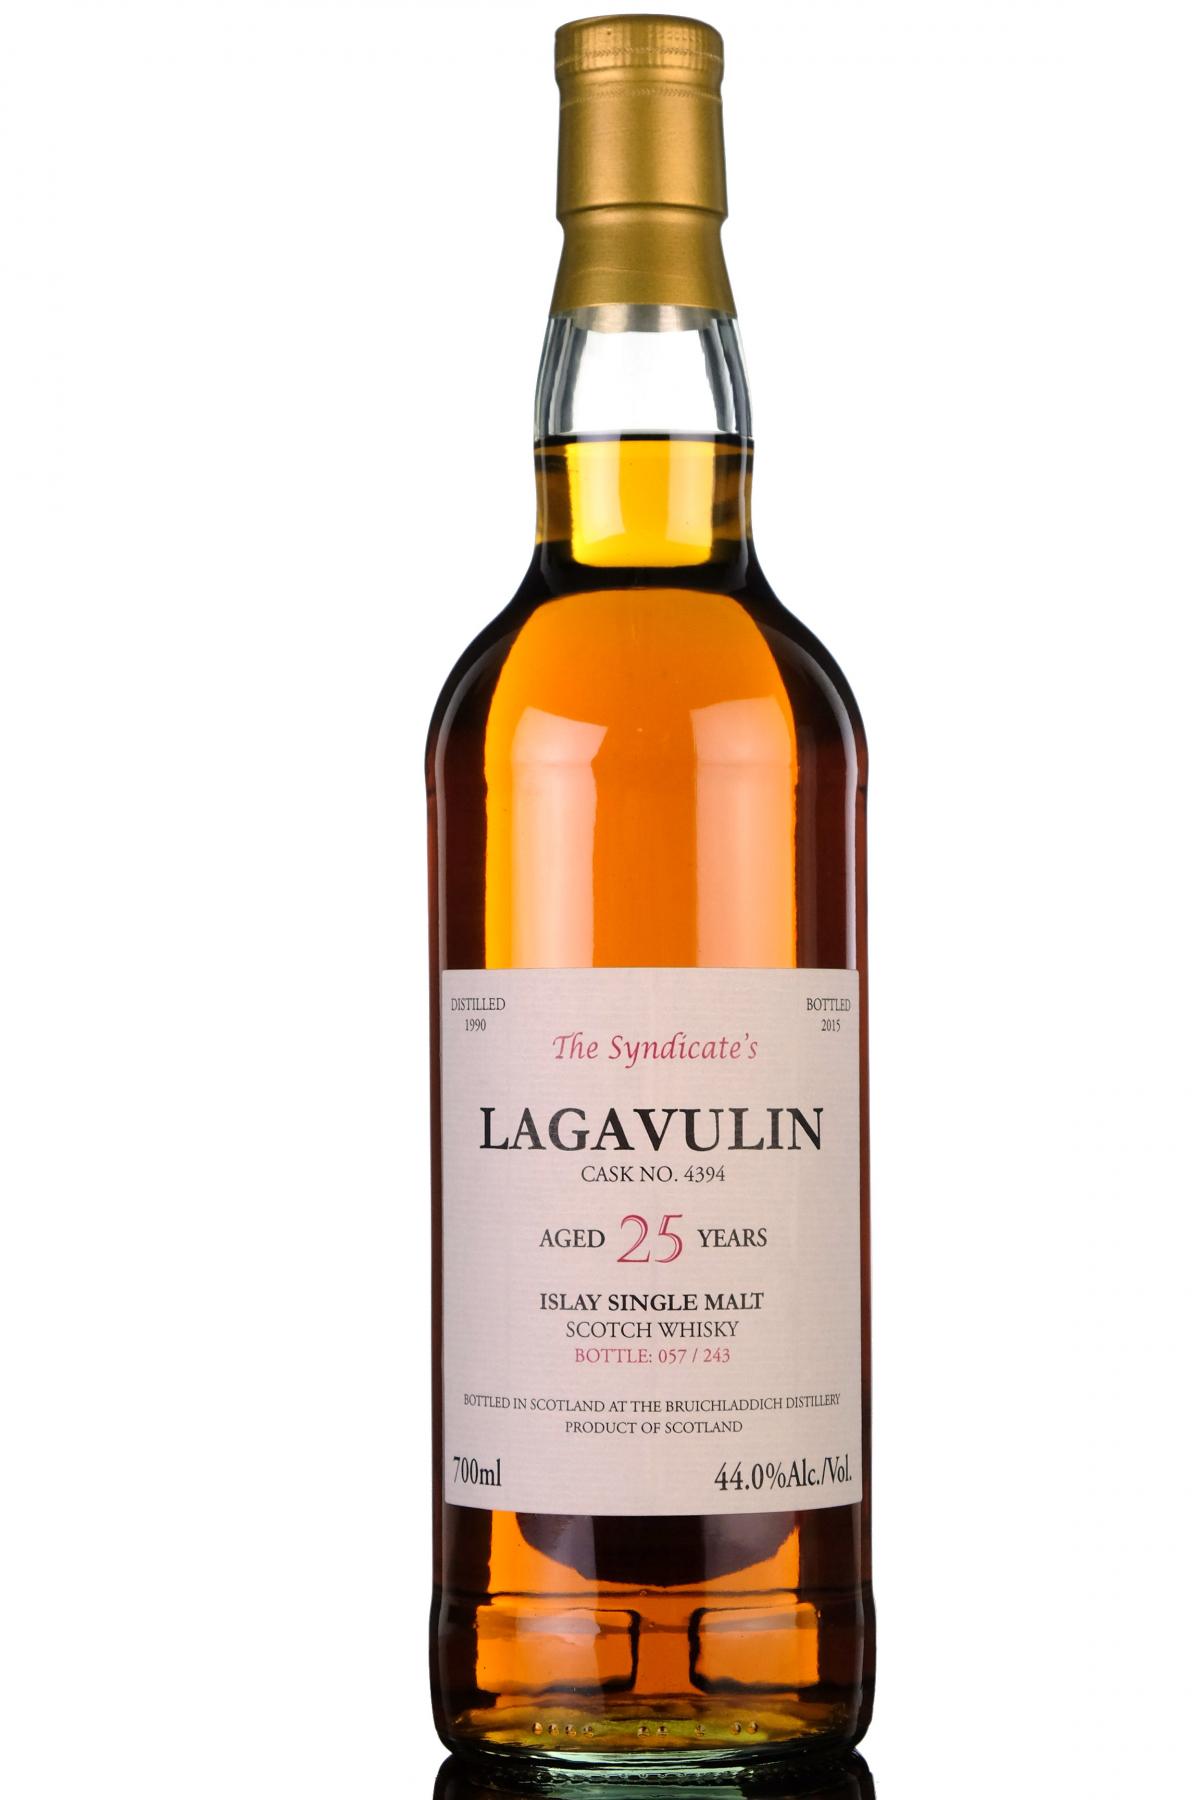 Lagavulin 1990-2015 - 25 Year Old - The Syndicate